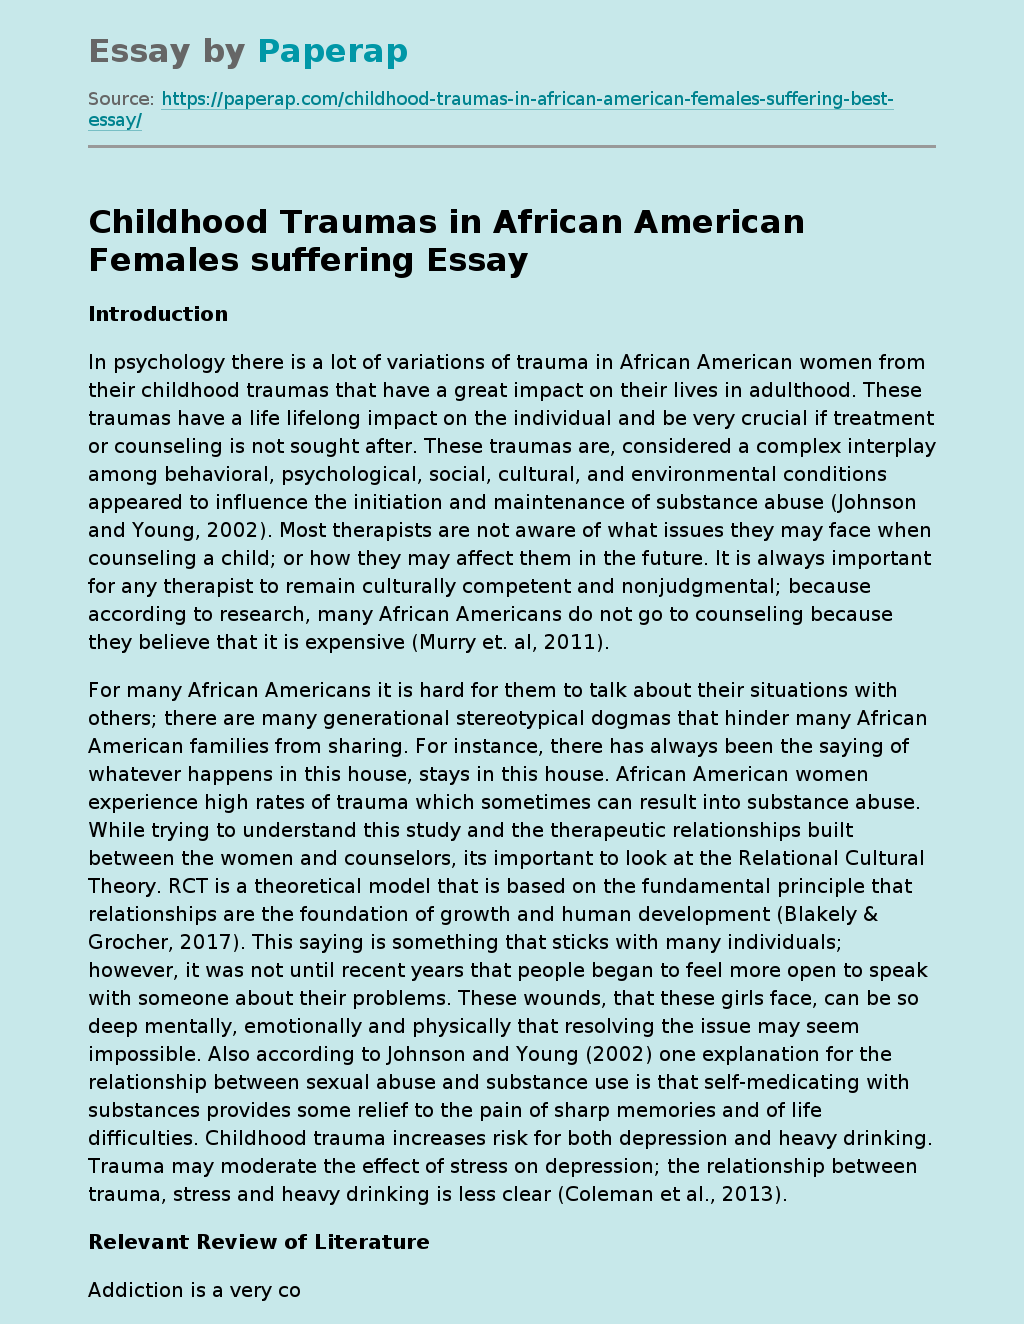 Childhood Traumas in African American Females suffering